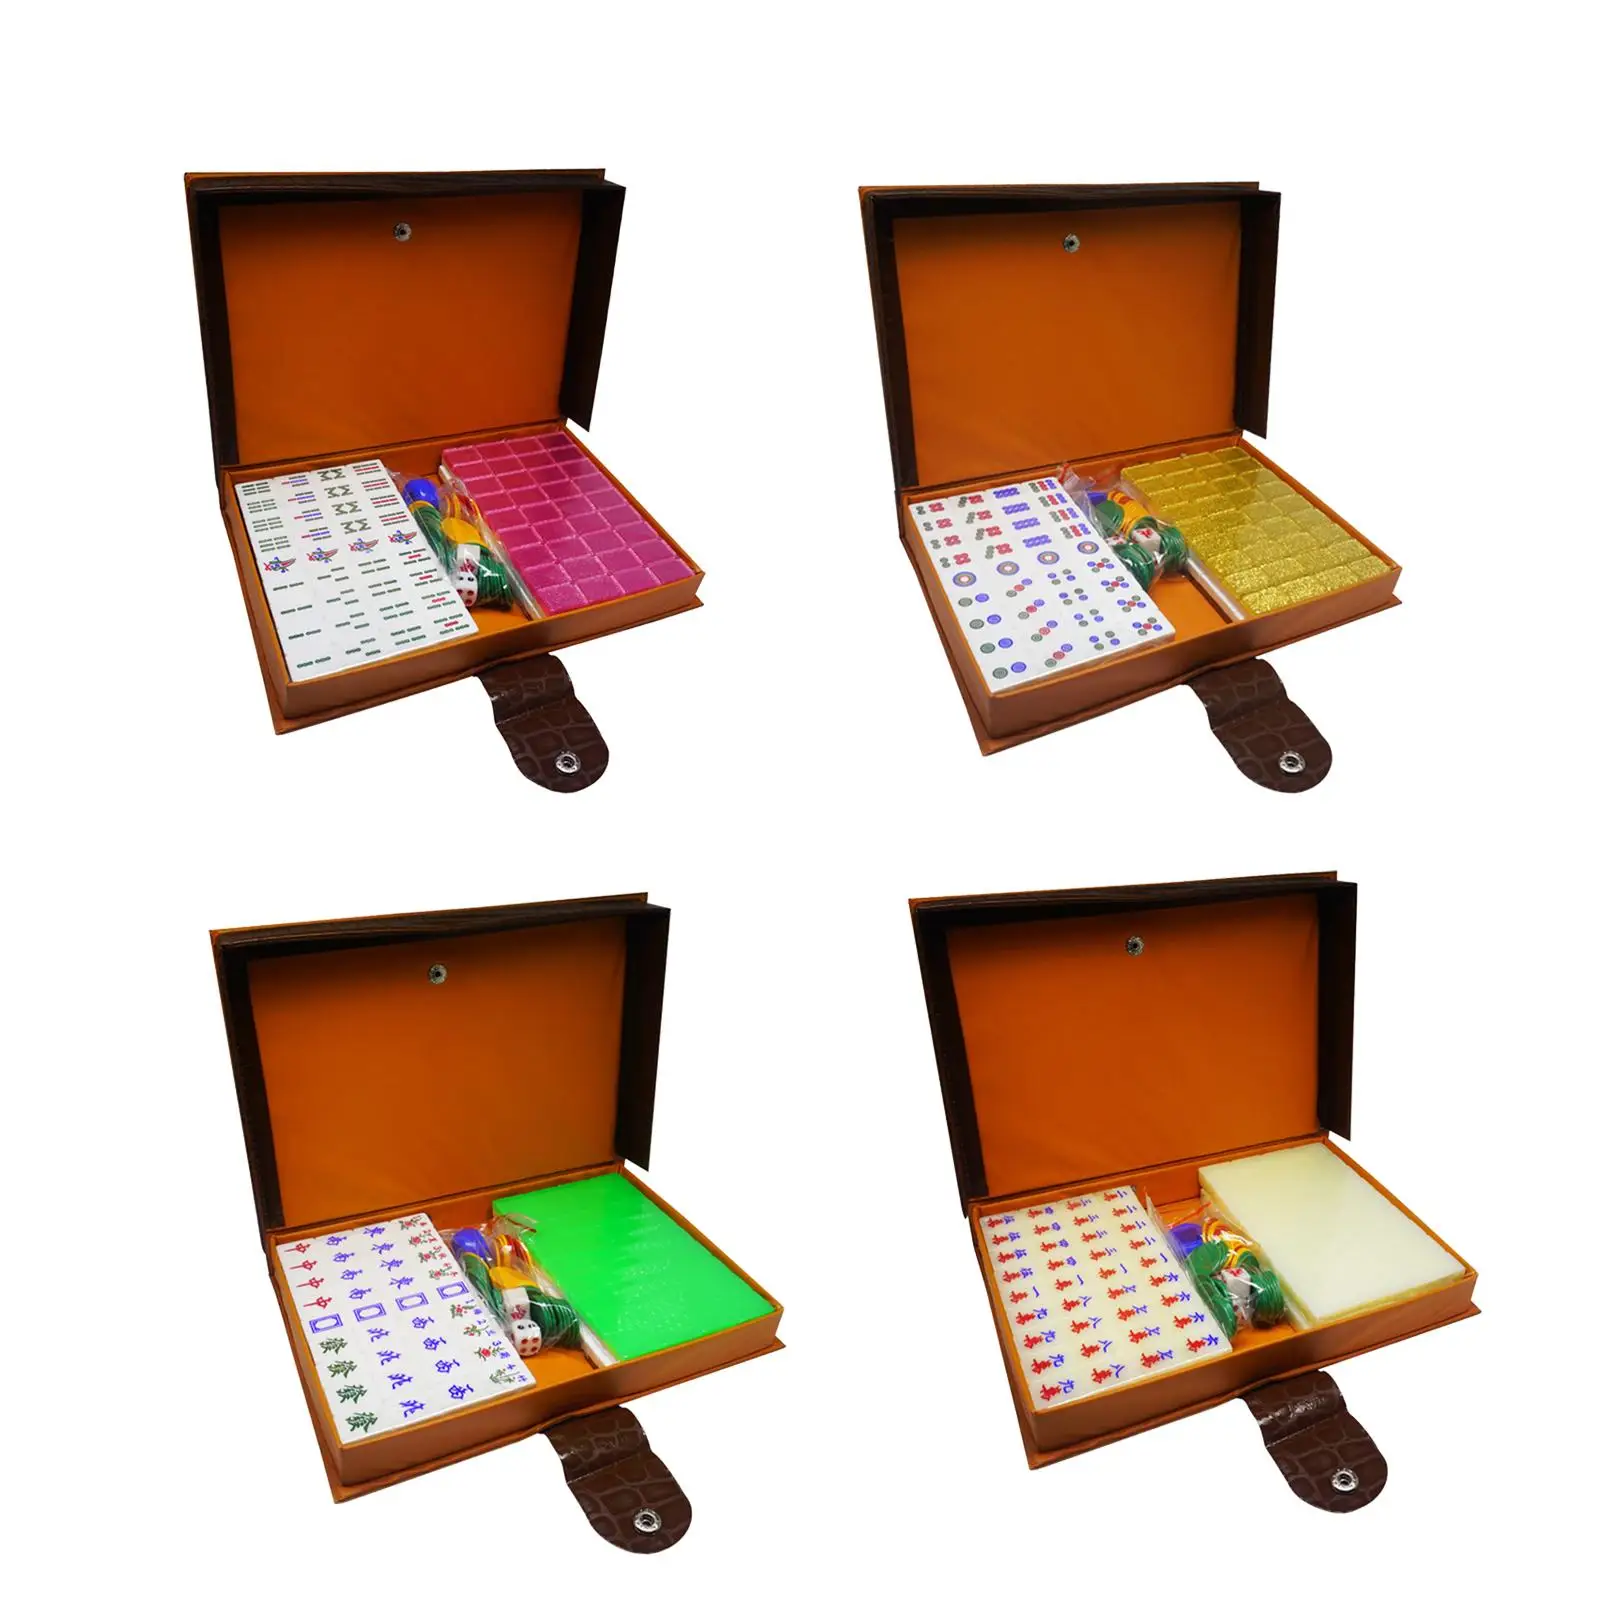 Travel Mahjong Game Set with Carry Box 3-4 People Easy to Read 144 Tiles Acrylic mAh Jongg for Game Gatherings Party Fun Home